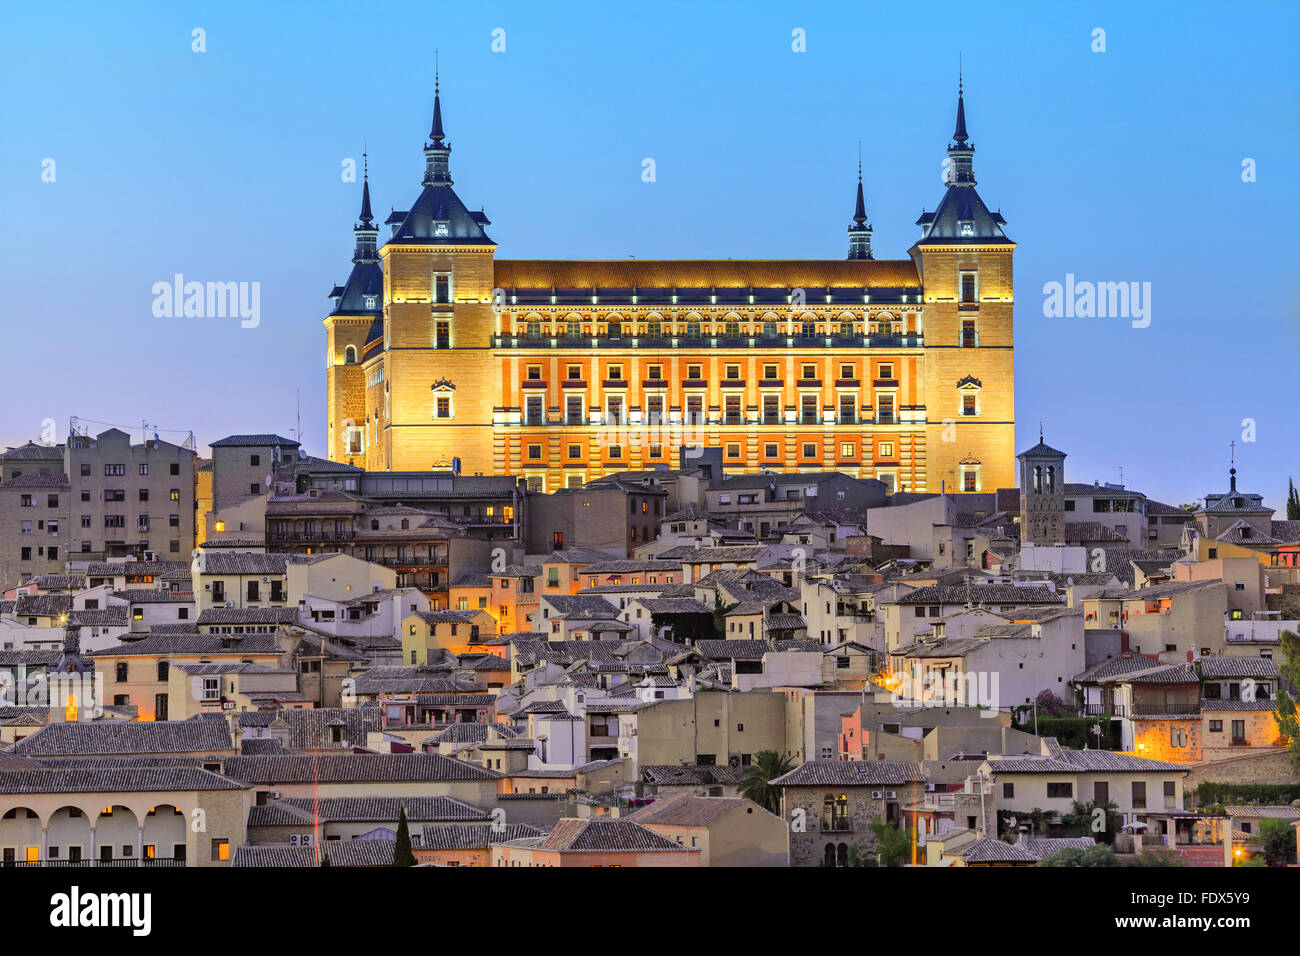 The Alcazar of Toledo - is a stone fortification located in the highest point of Toledo, Castile - La Mancha, Spain Stock Photo